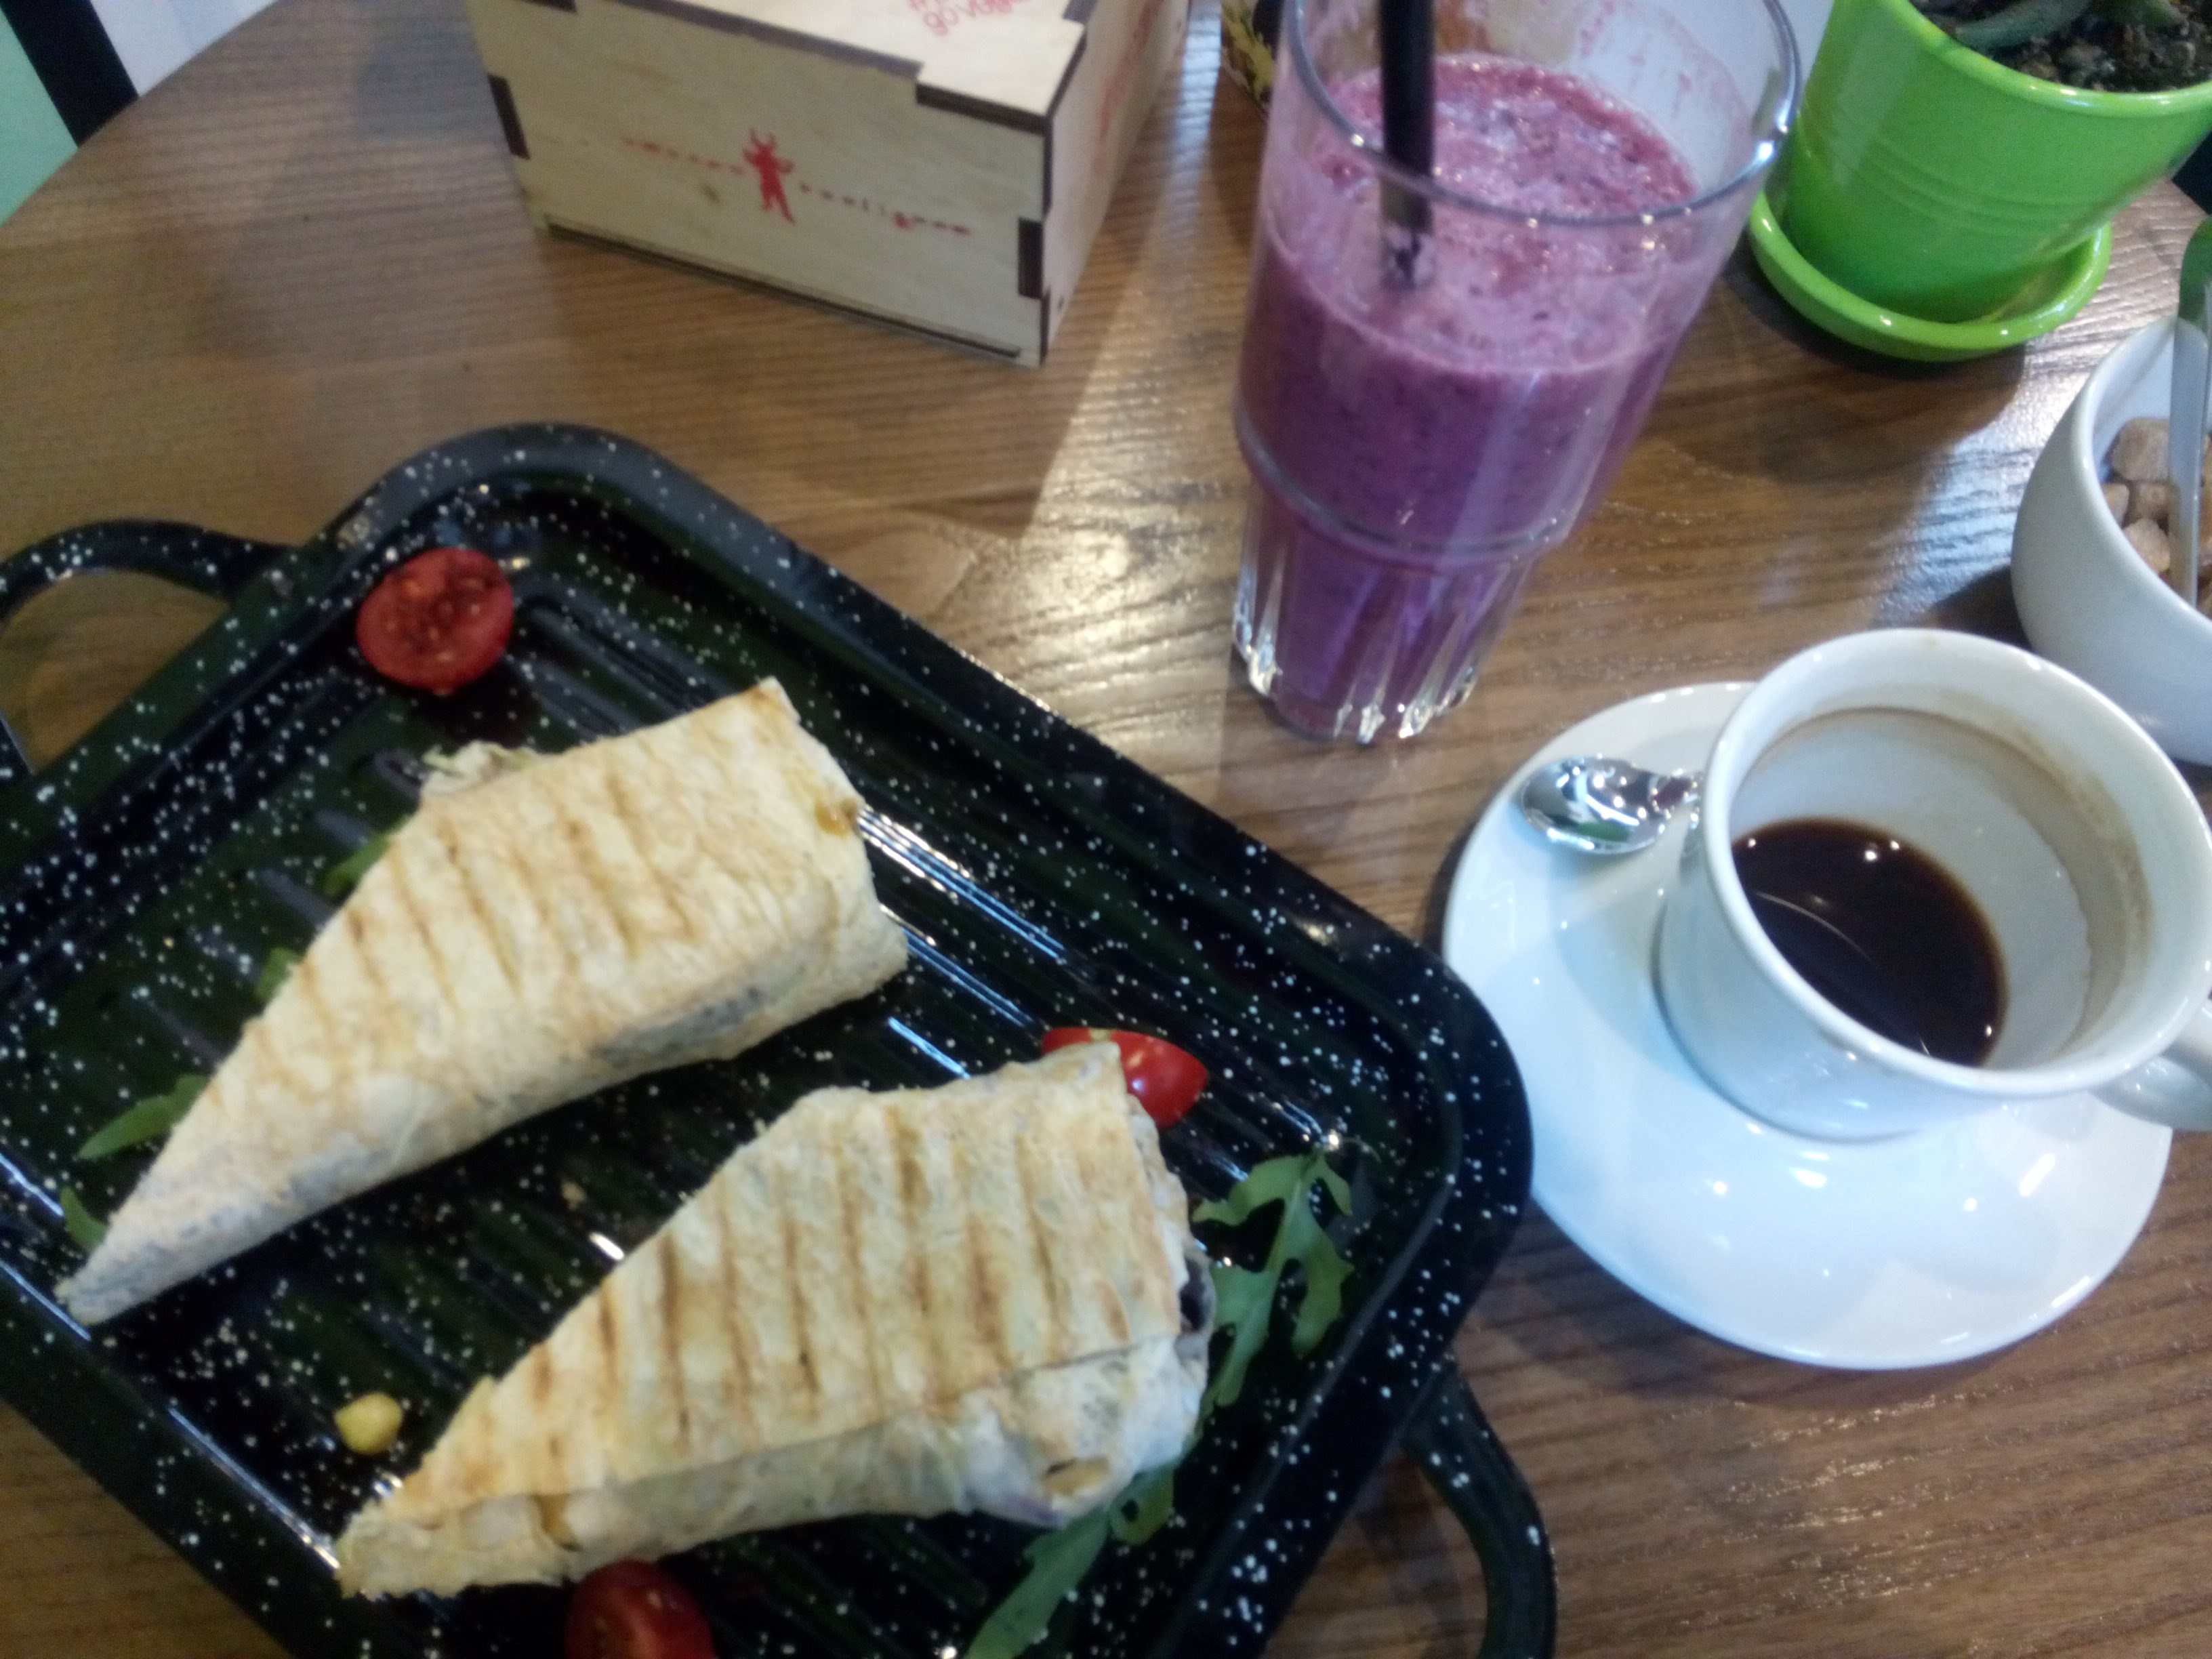 Two halves of a tortilla wrap on a black tray, on a table beside a purple smoothie in a glass and an espresso in a white cup and saucer